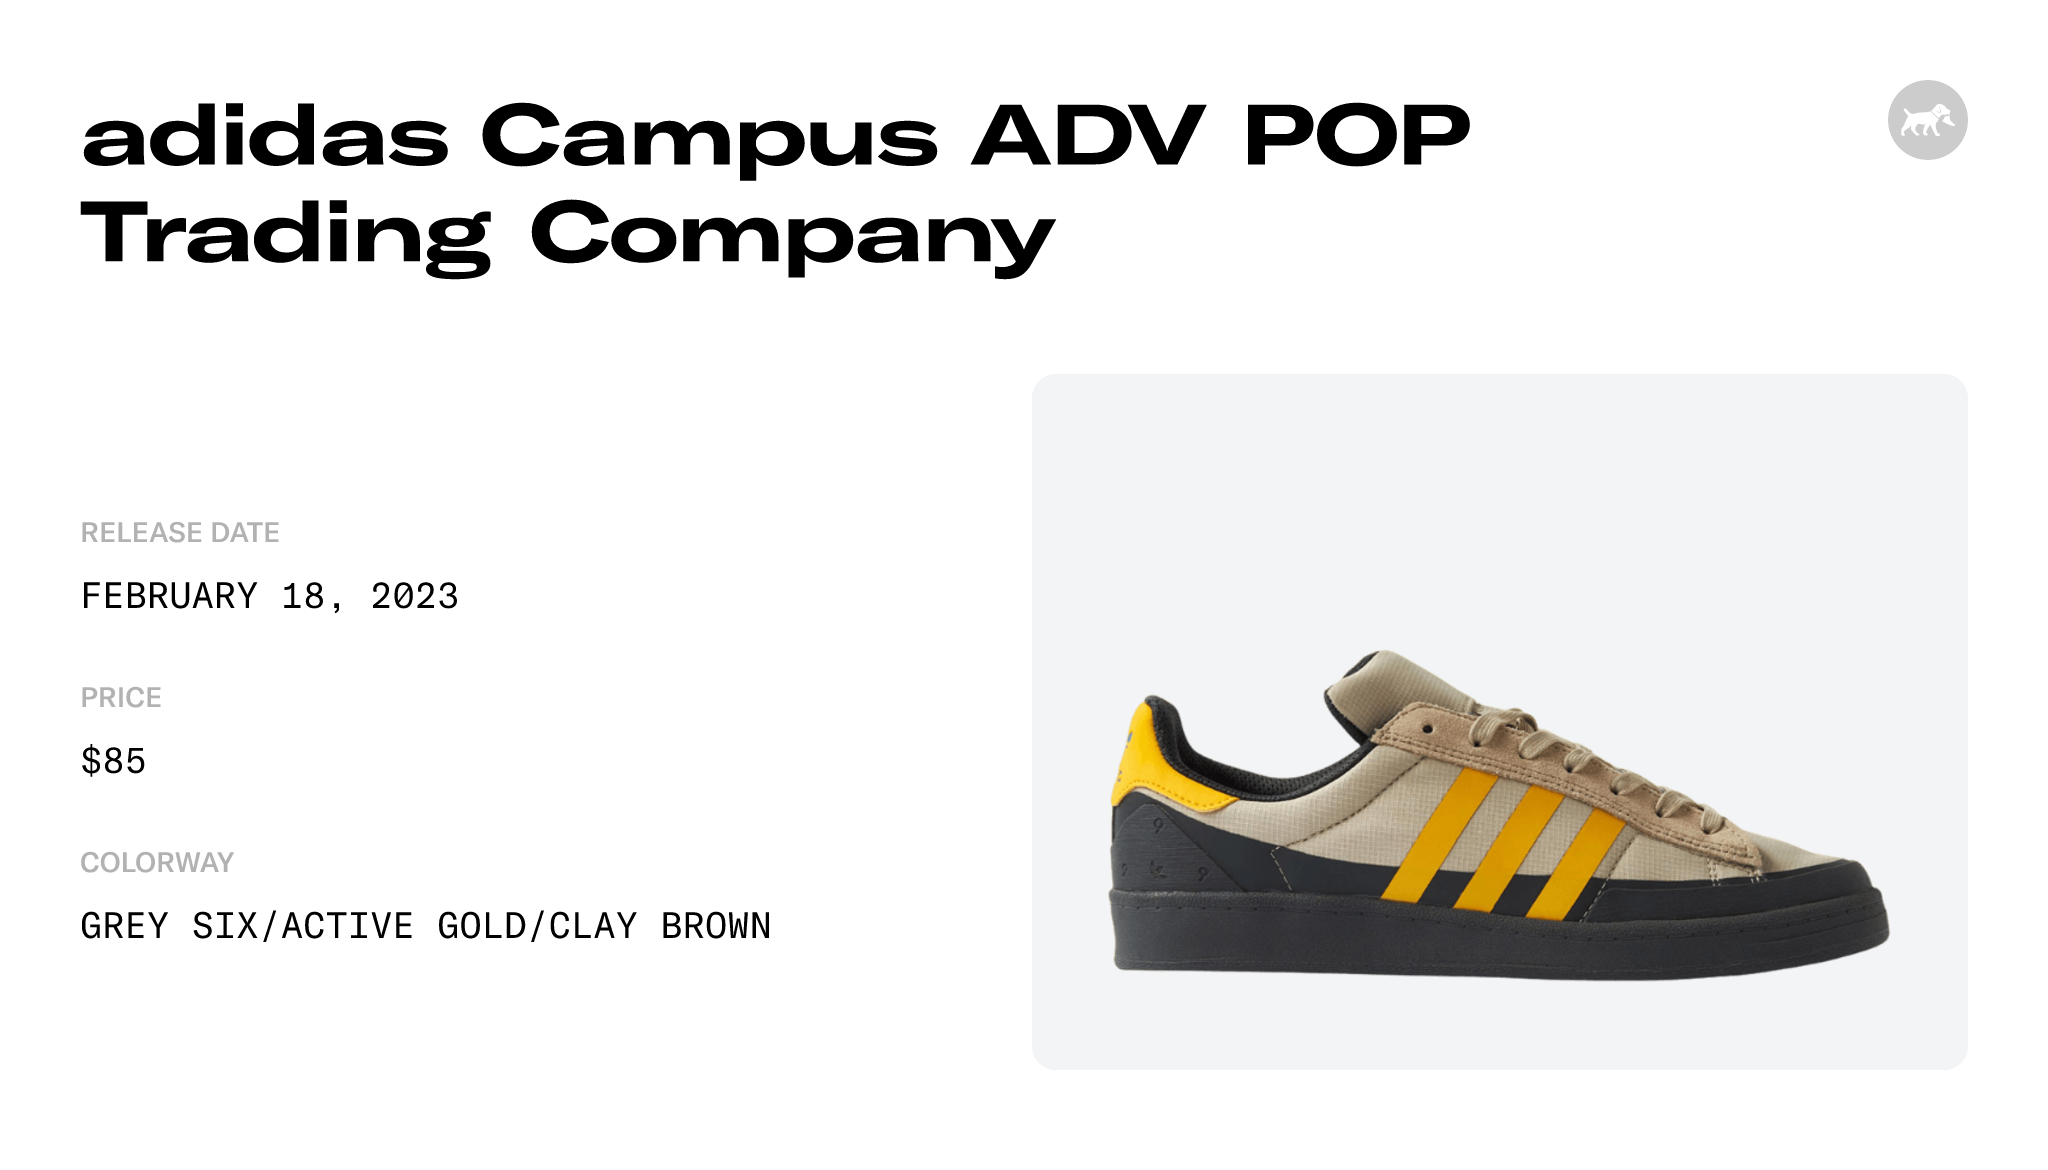 adidas Campus ADV POP Trading Company Raffles and Release Date 